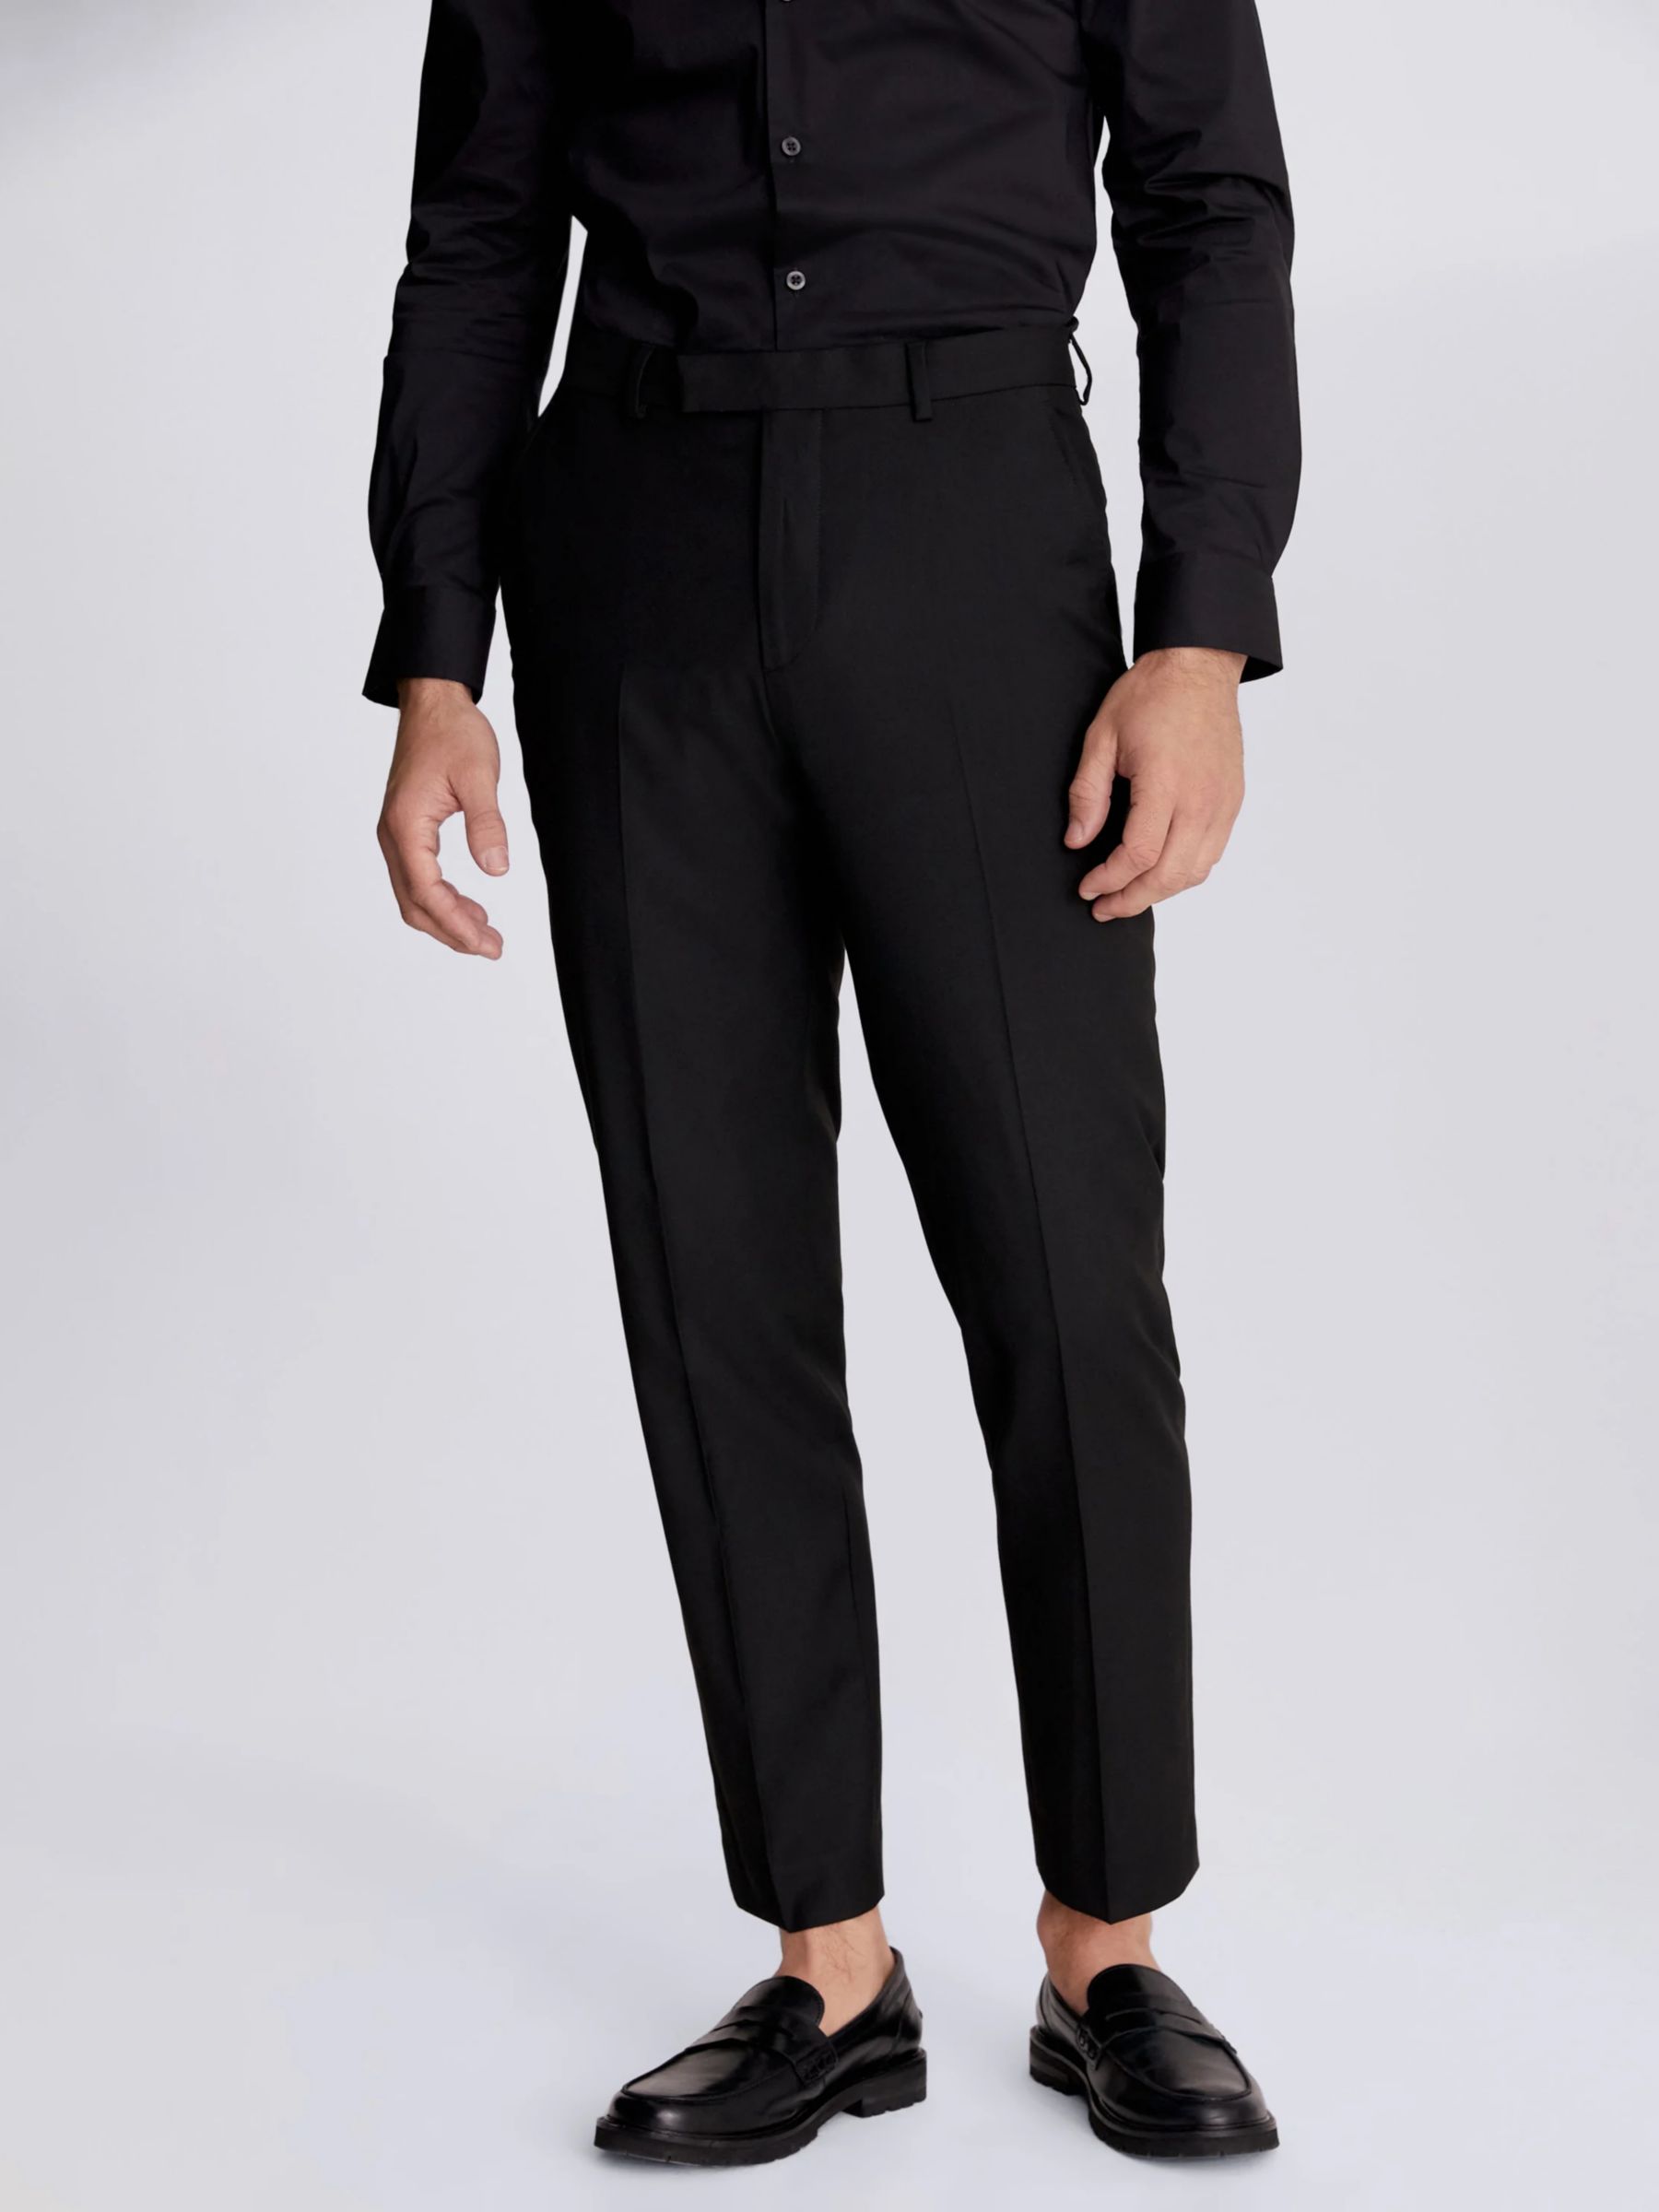 Moss 1851 Regular Fit Stretch Suit Trousers, Black at John Lewis & Partners